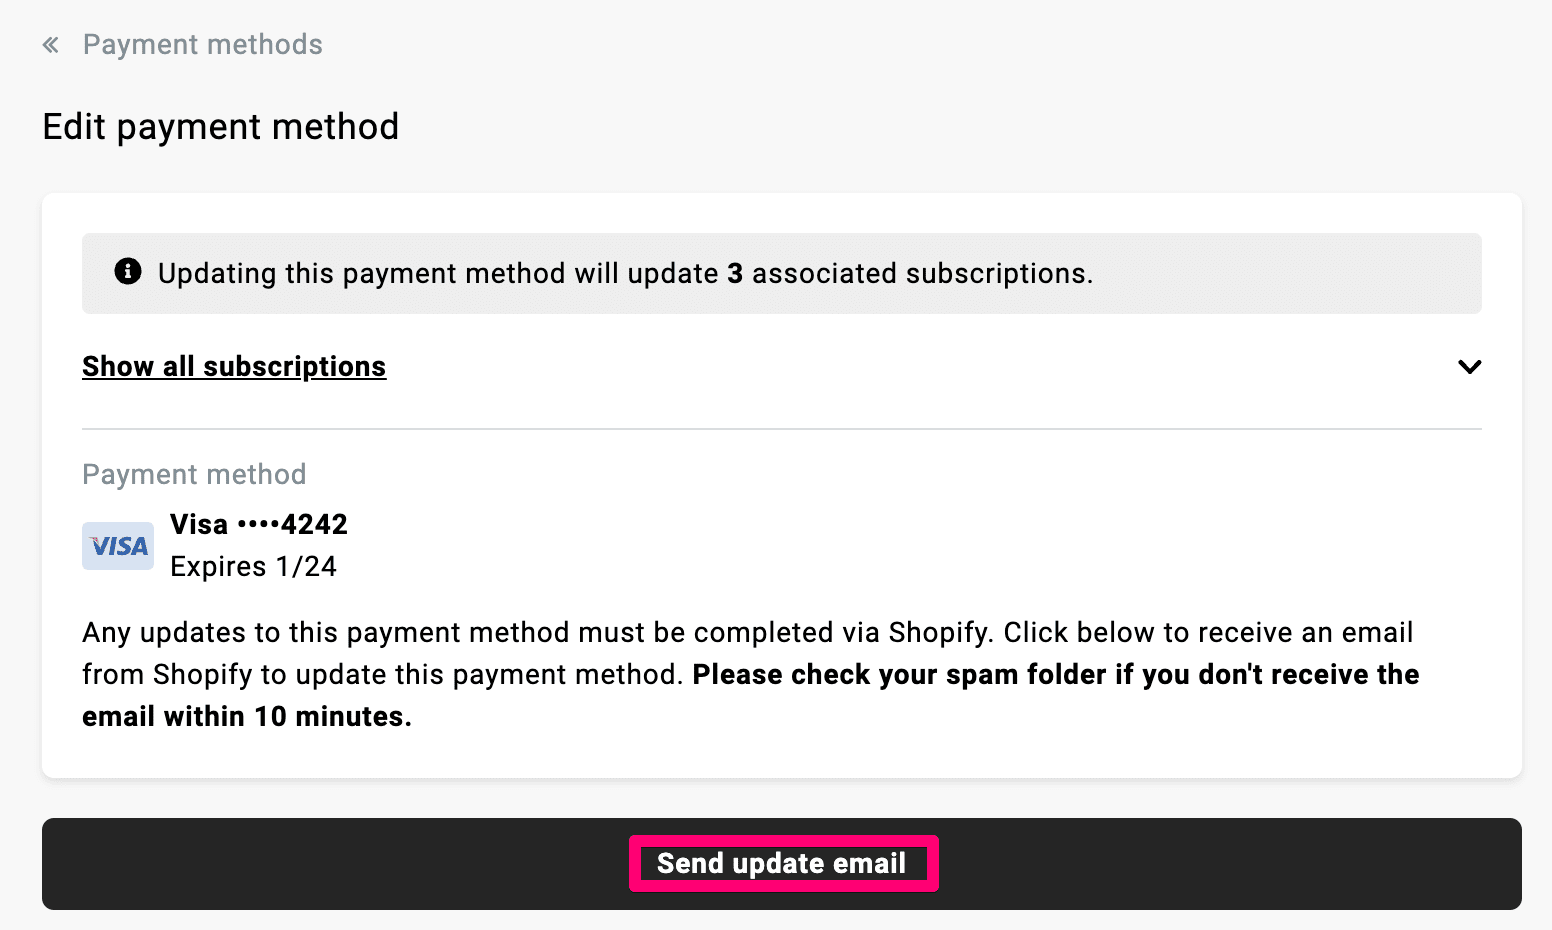 click send update email to adjust payment method